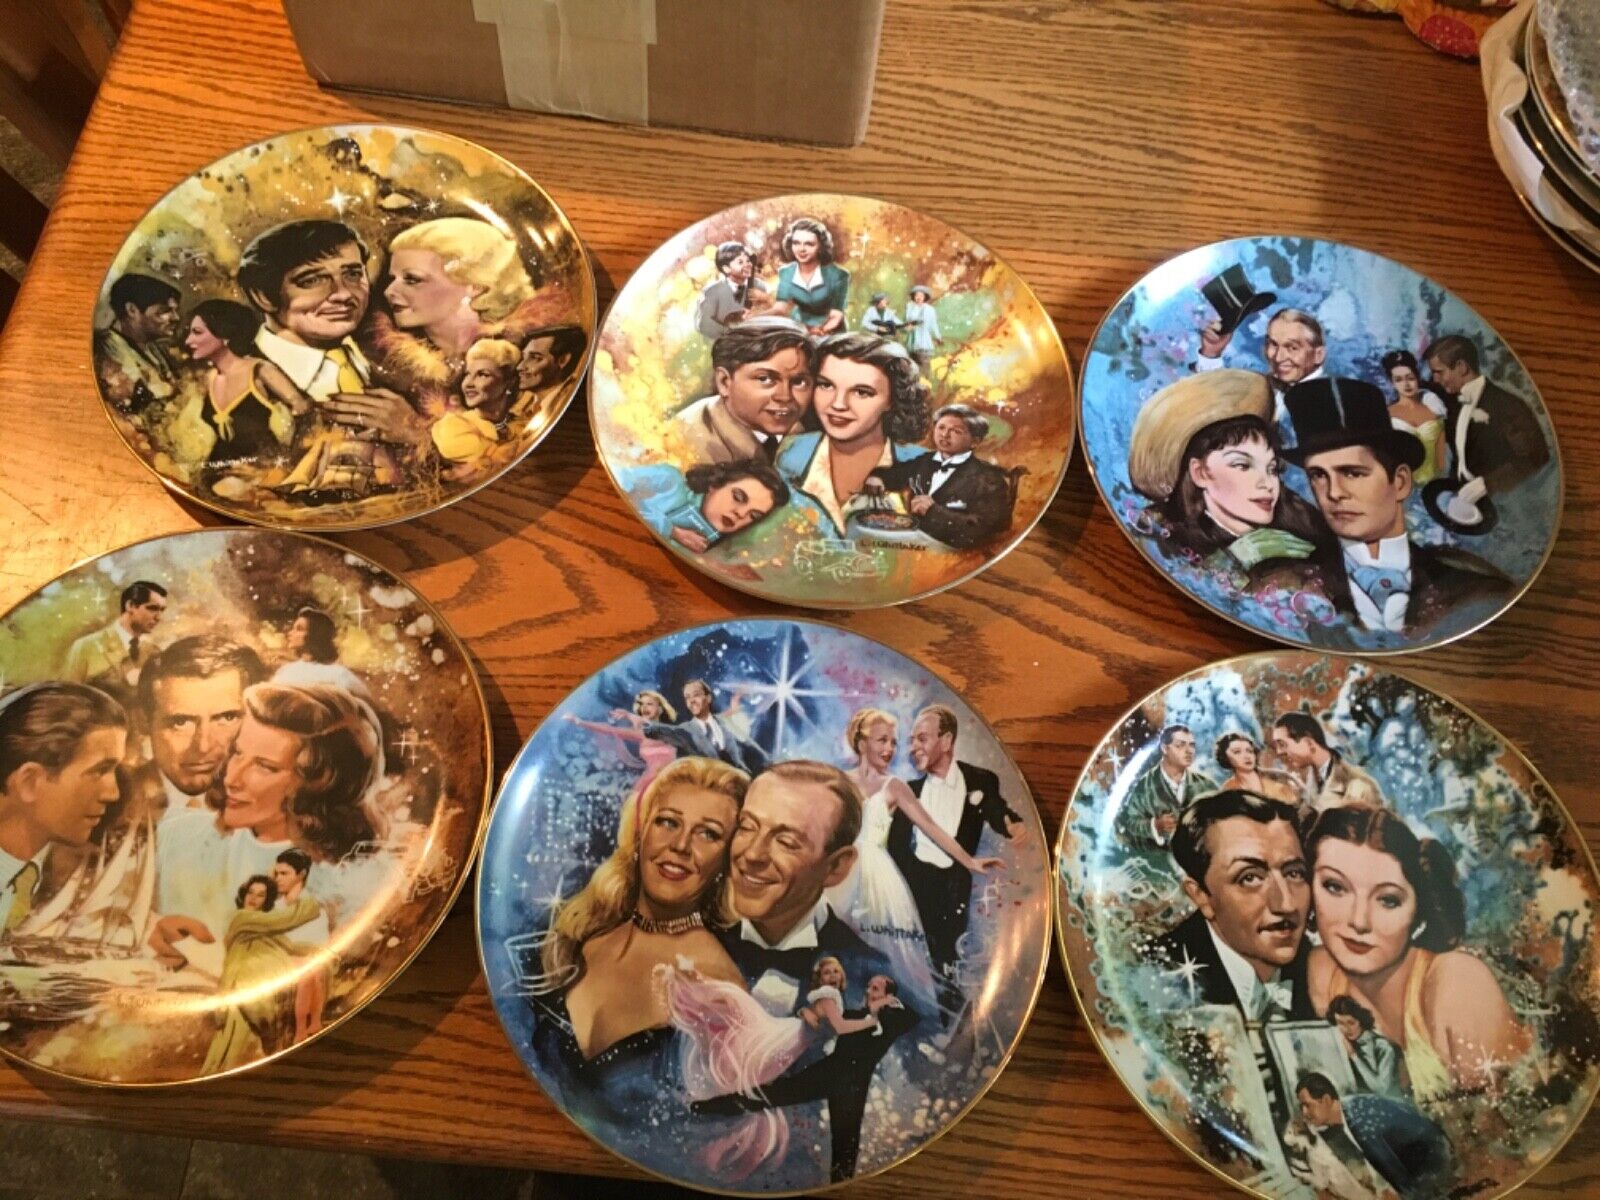 FUN Set of SIX Golden Age of Cinema Plates-Gable, Grant, Garland, more